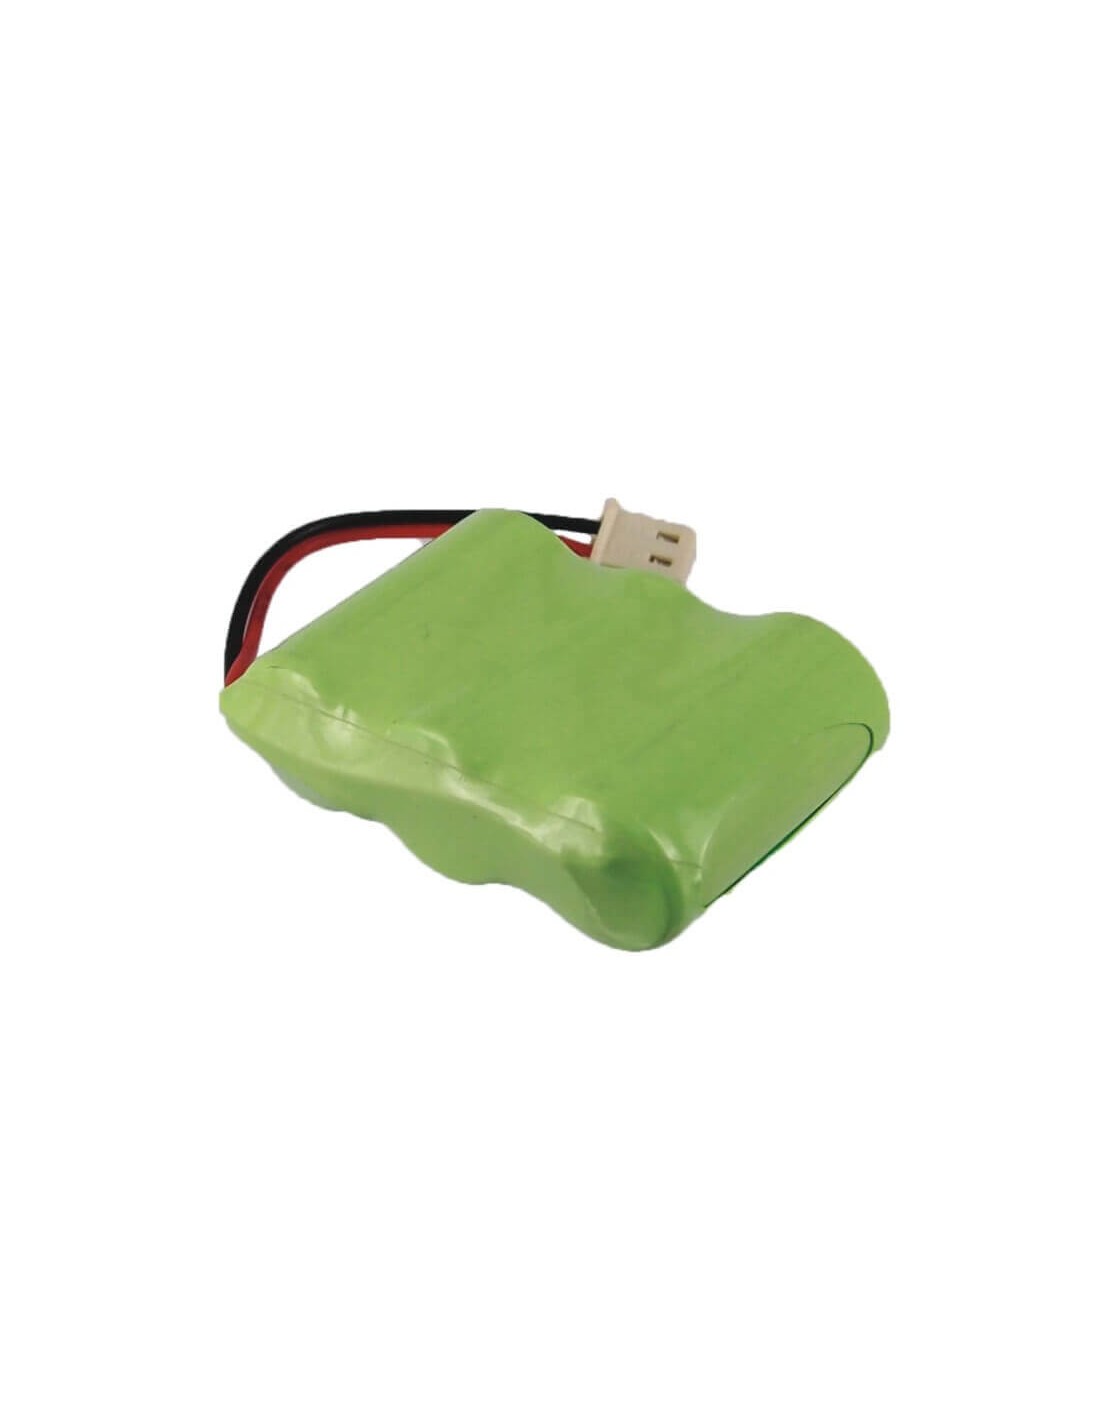 Battery for American, Cls45i 3.6V, 600mAh - 2.16Wh